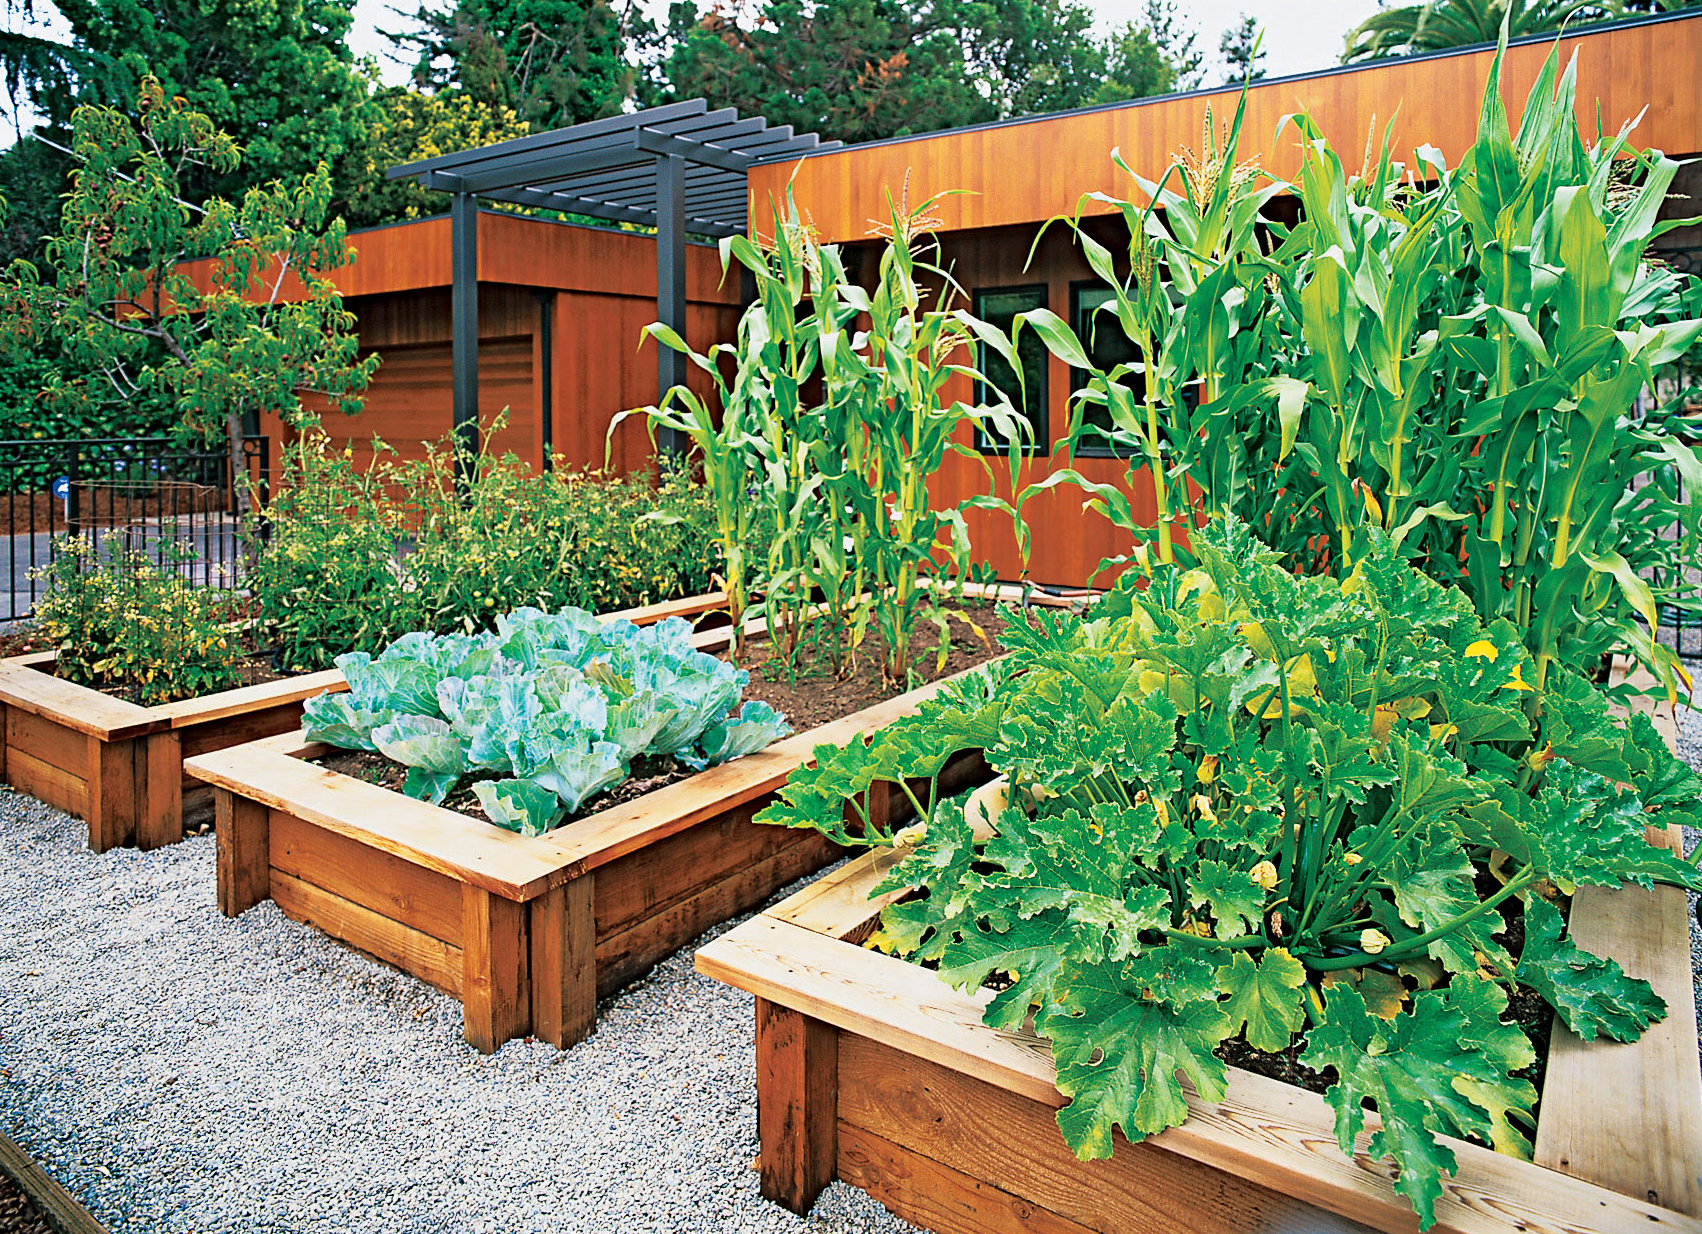 Grow Vegetables in the Front Yard